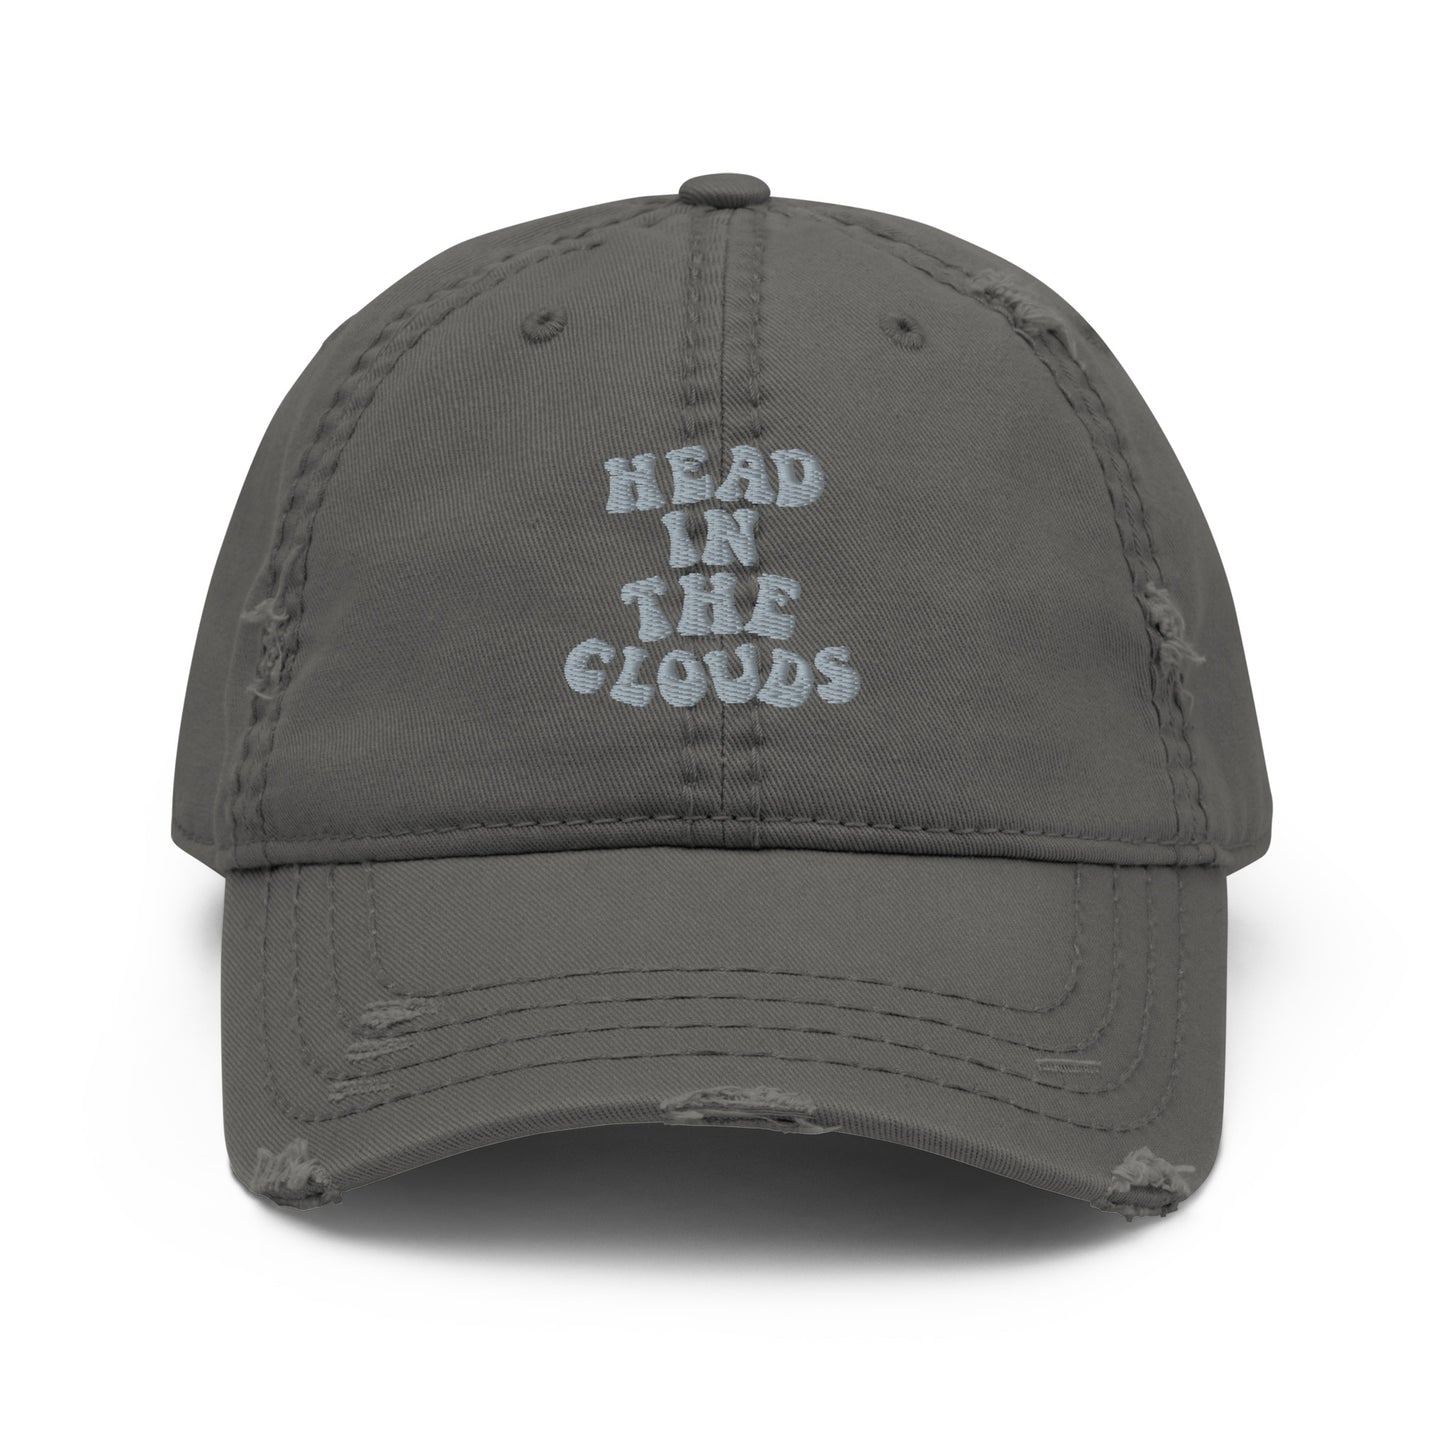 Head in the Clouds hat